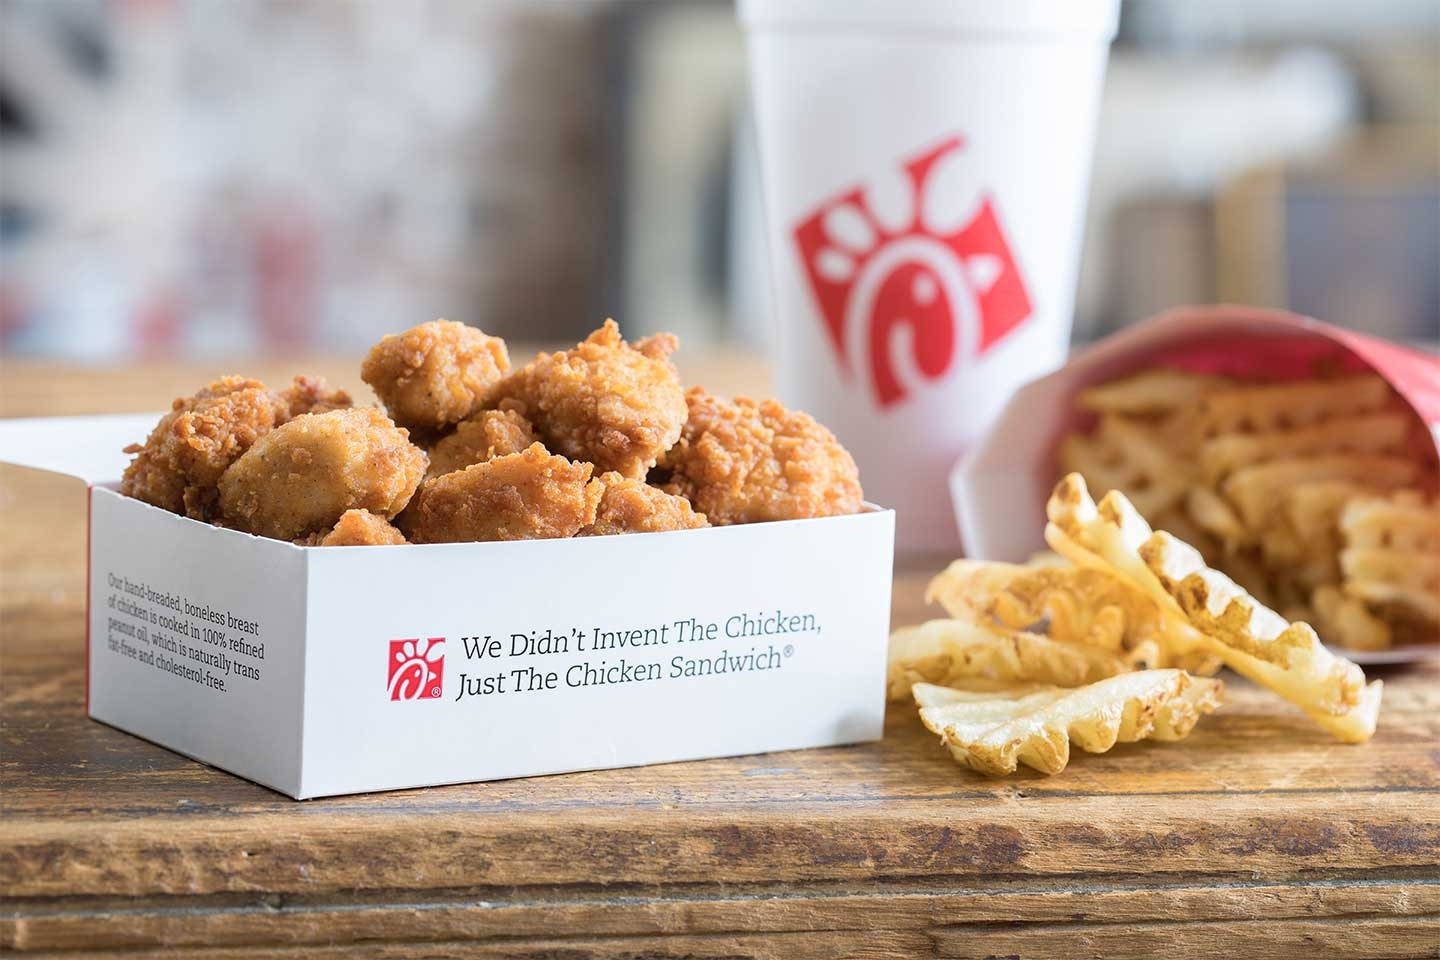 Mark Your Calendar: Free Chick-Fil-A Nuggets This January with Will Chic Filet Have Calendars For 2020